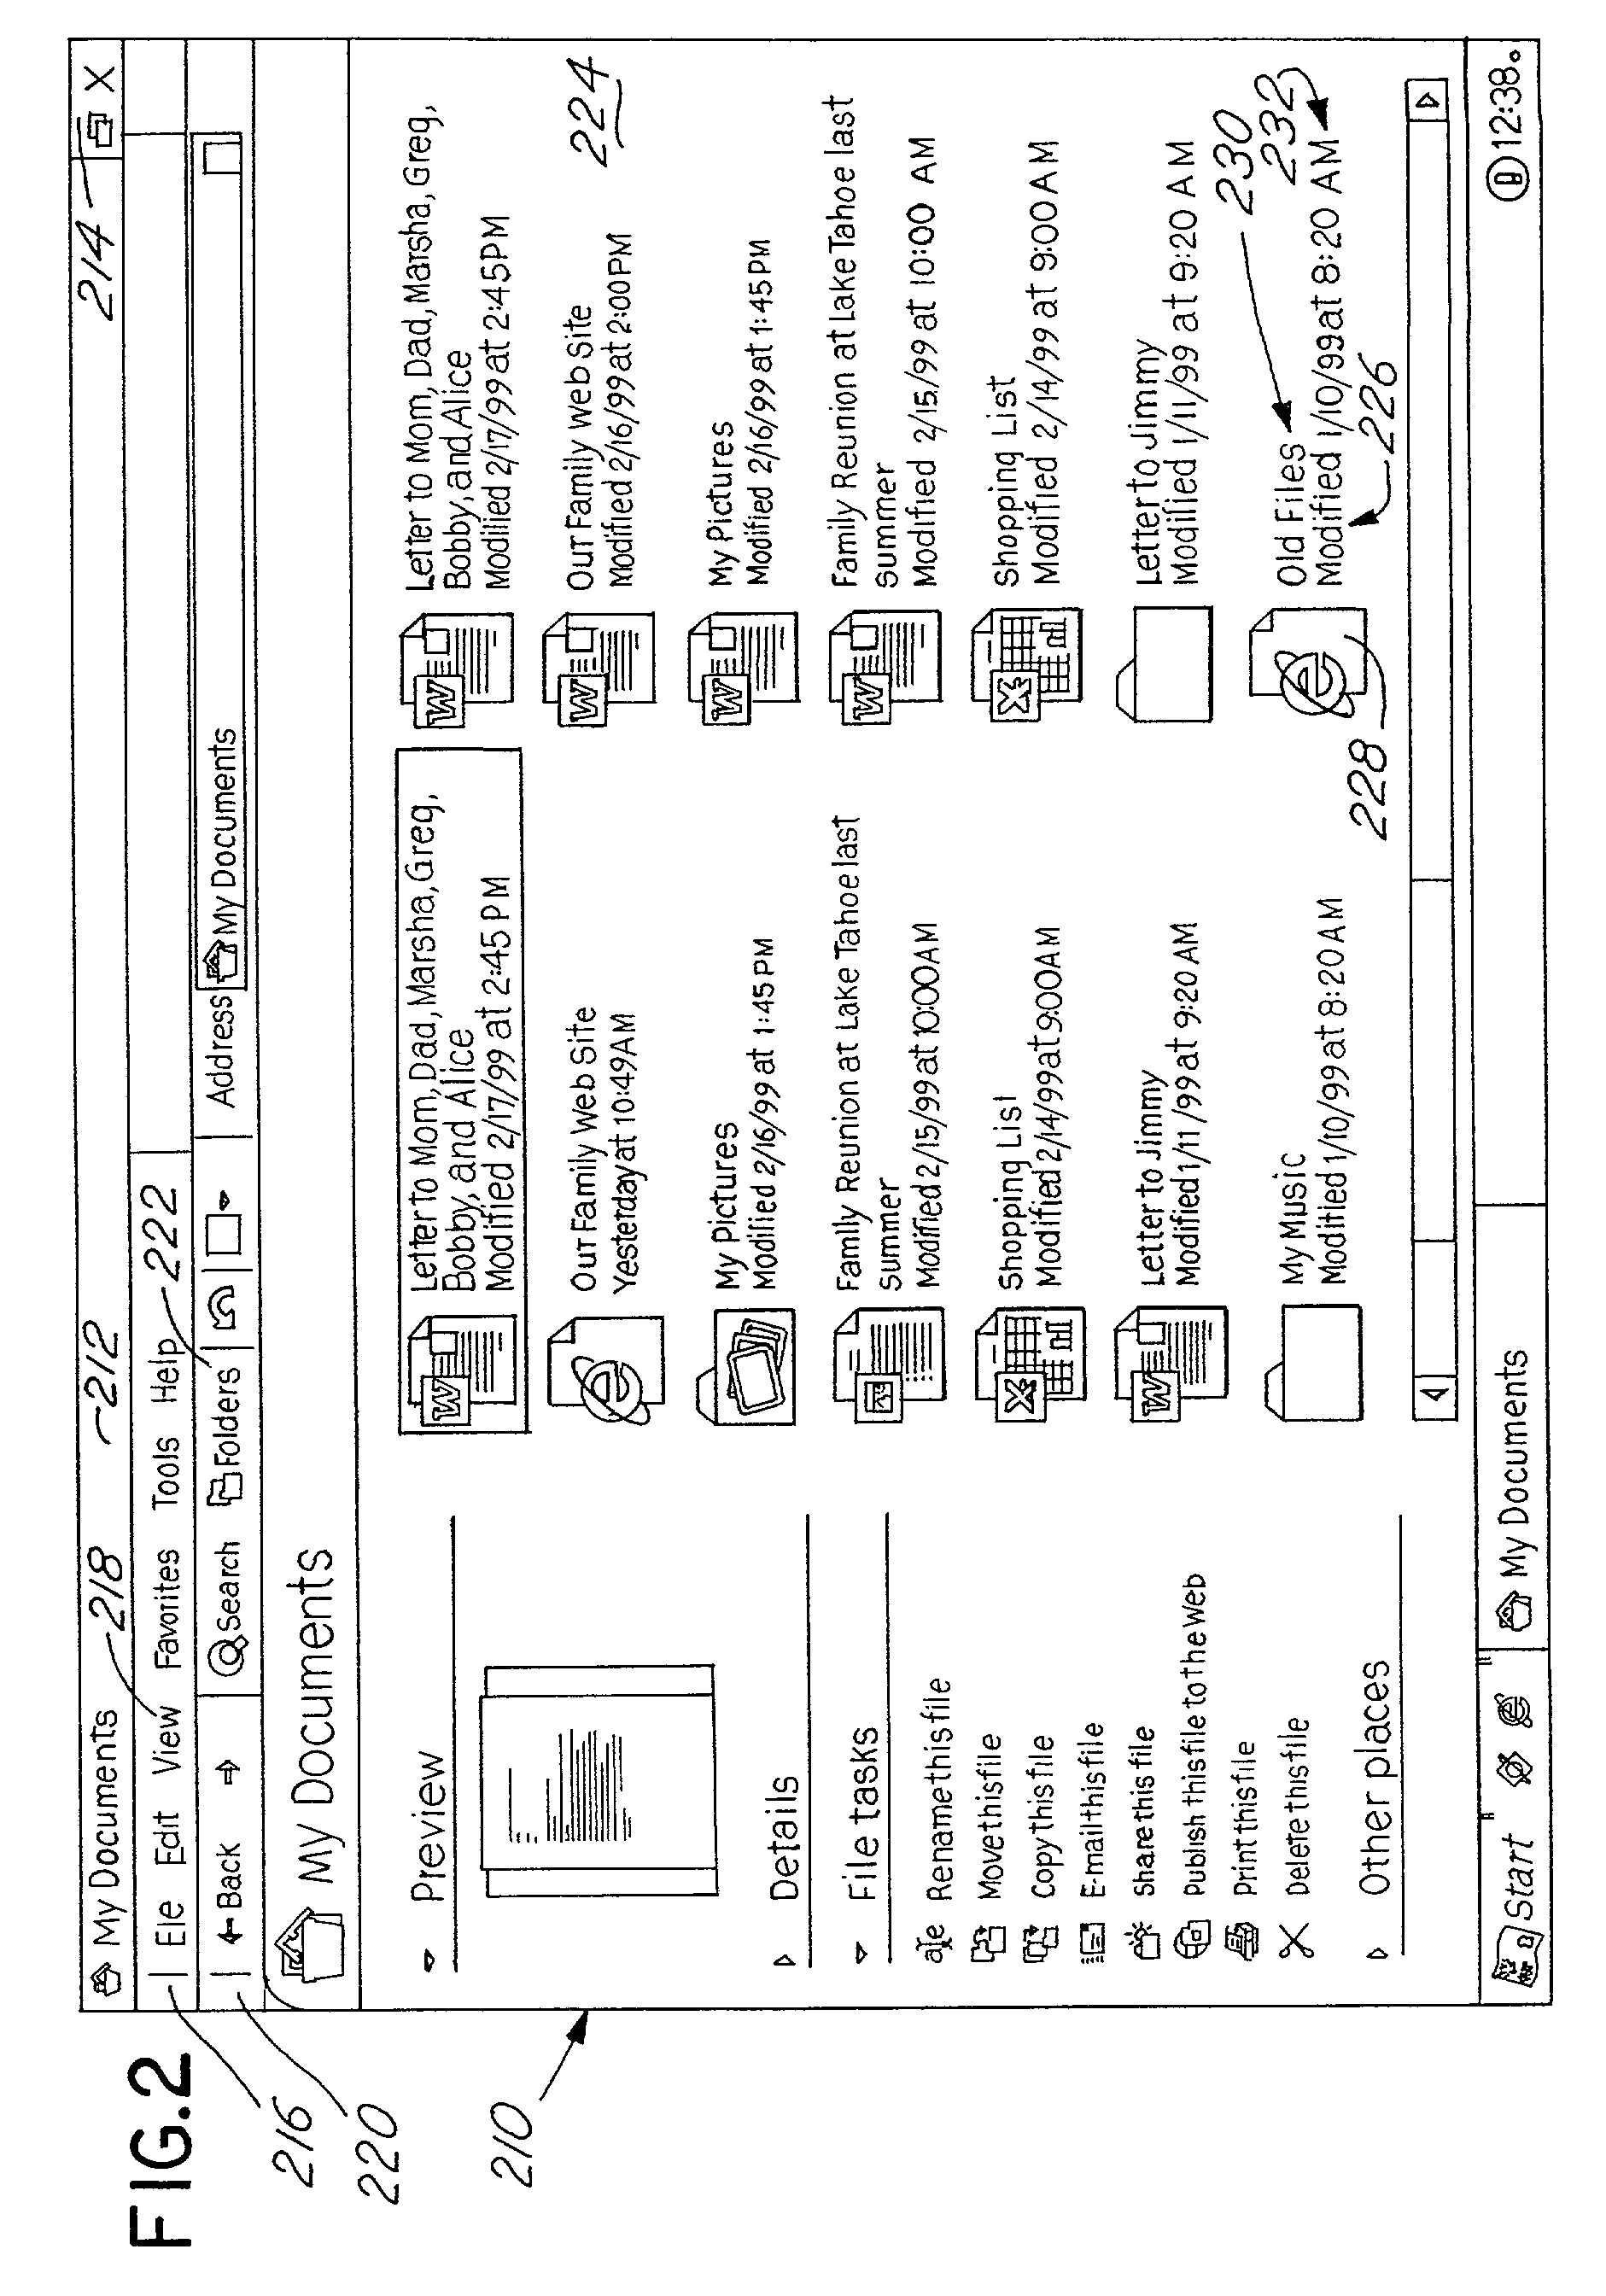 Displaying graphical information and user selected properties on a computer interface